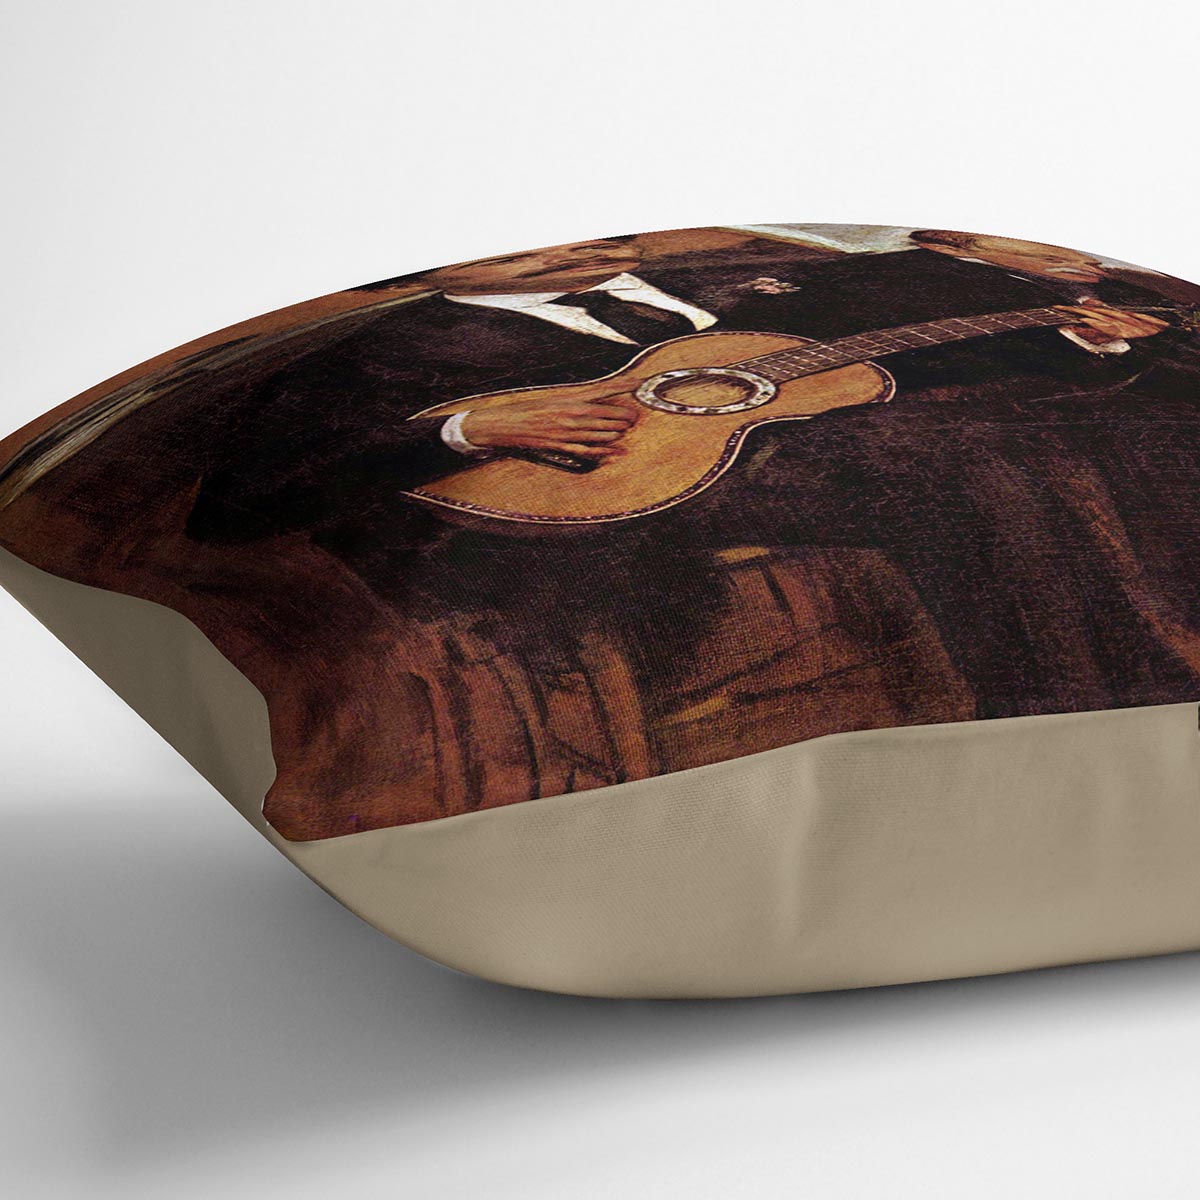 The guitarist Pagans and Monsieur Degas by Manet Cushion